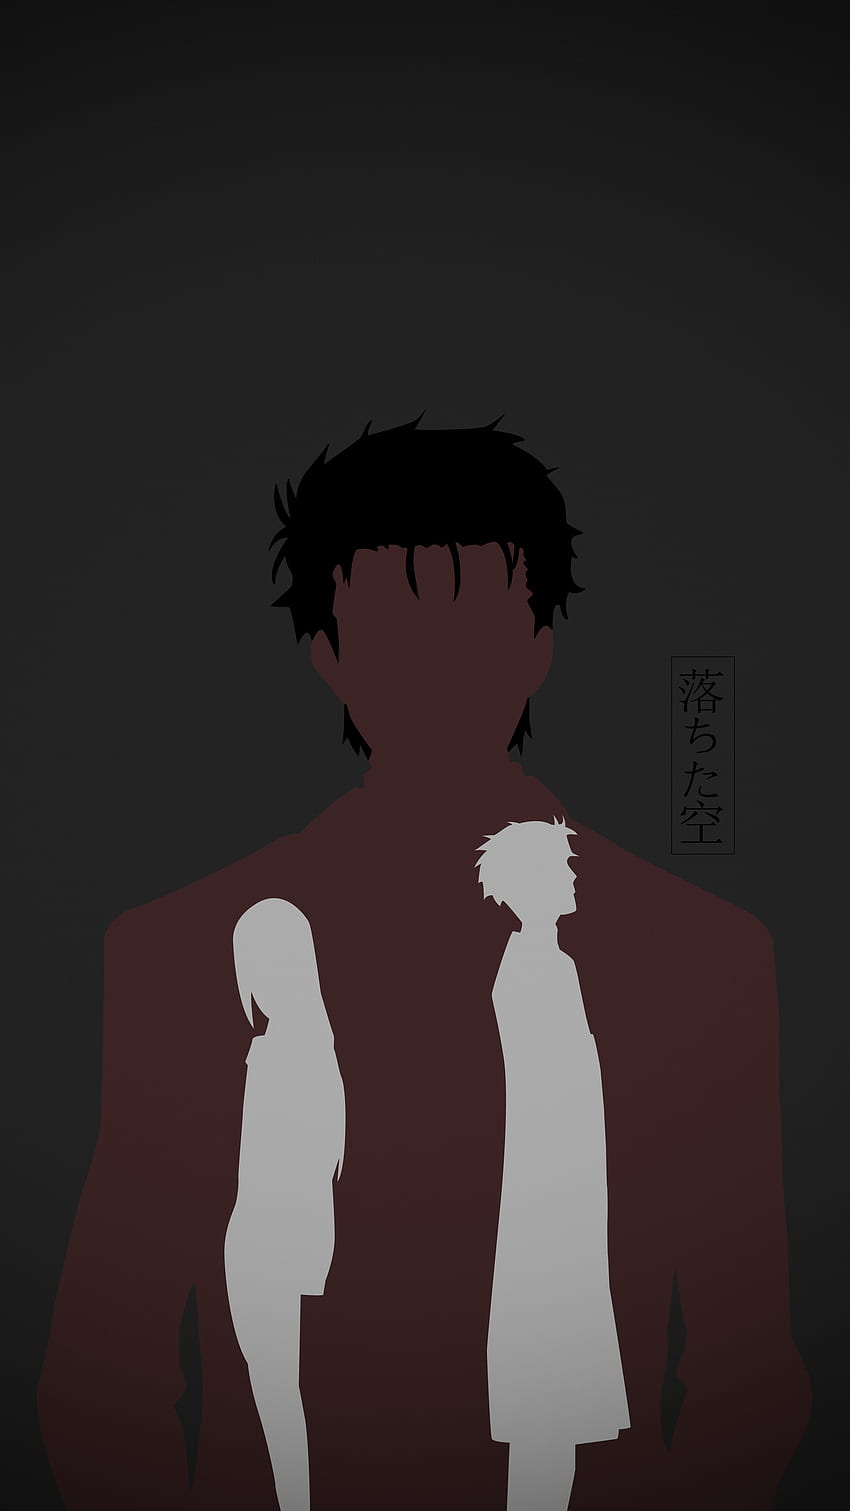 Steins Gate Anime Characters Awesome Aesthetic Silhouette Kurisu Makise and  Rintarou Okabe with His and Her Japanese Name Kanji - Steins Gate - Magnet